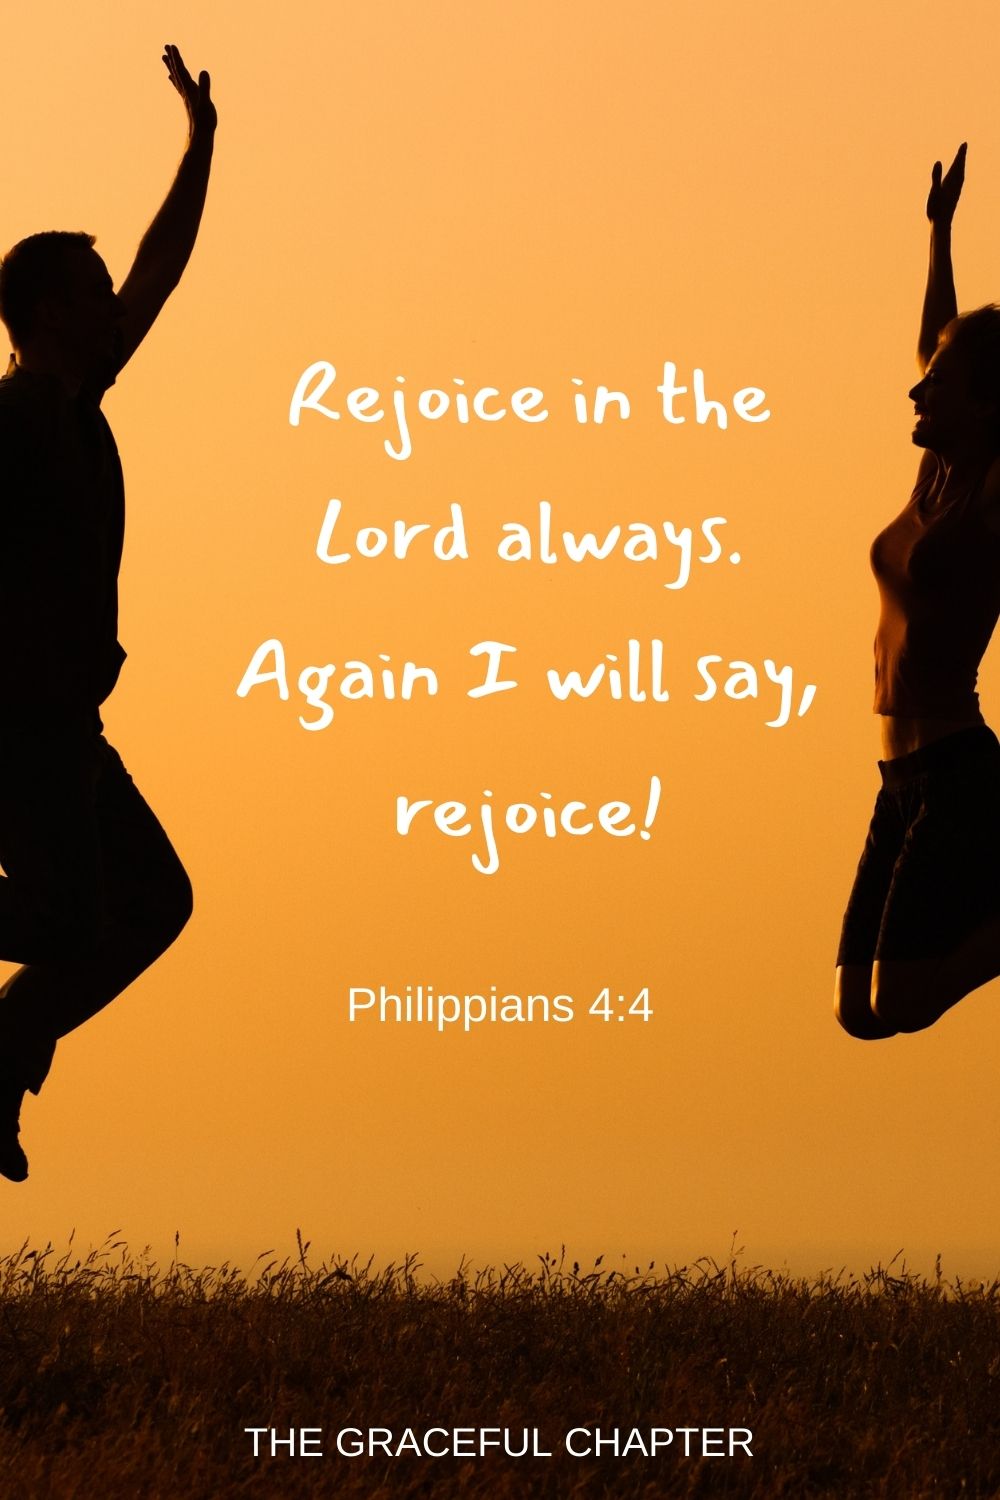 Rejoice in the Lord always. Again I will say, rejoice! Philippians 4:4